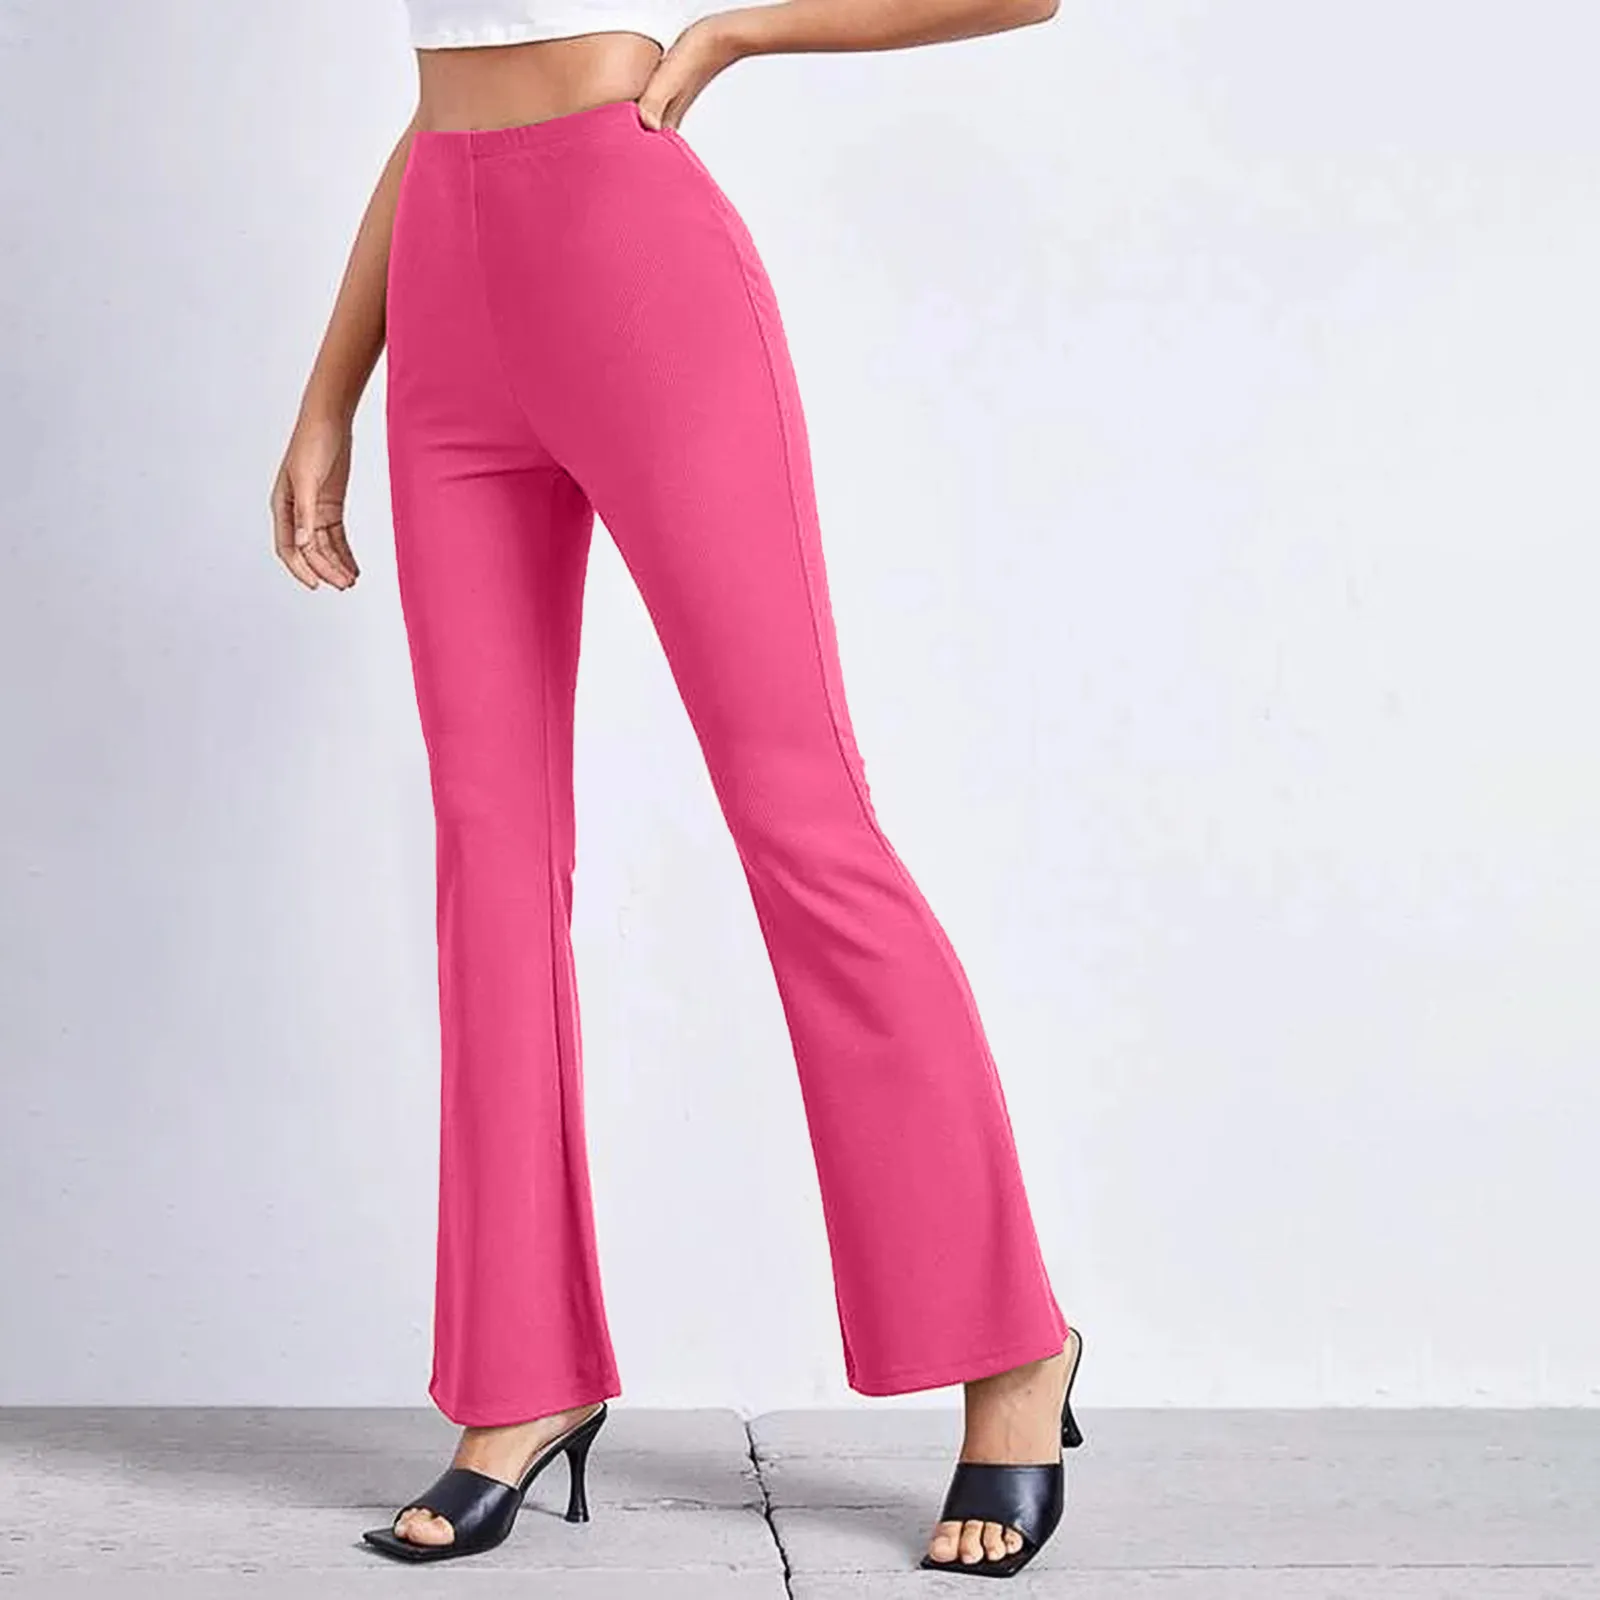 Wholesale Women Fashion Basic Solid Color High Waist Flared Work Pants